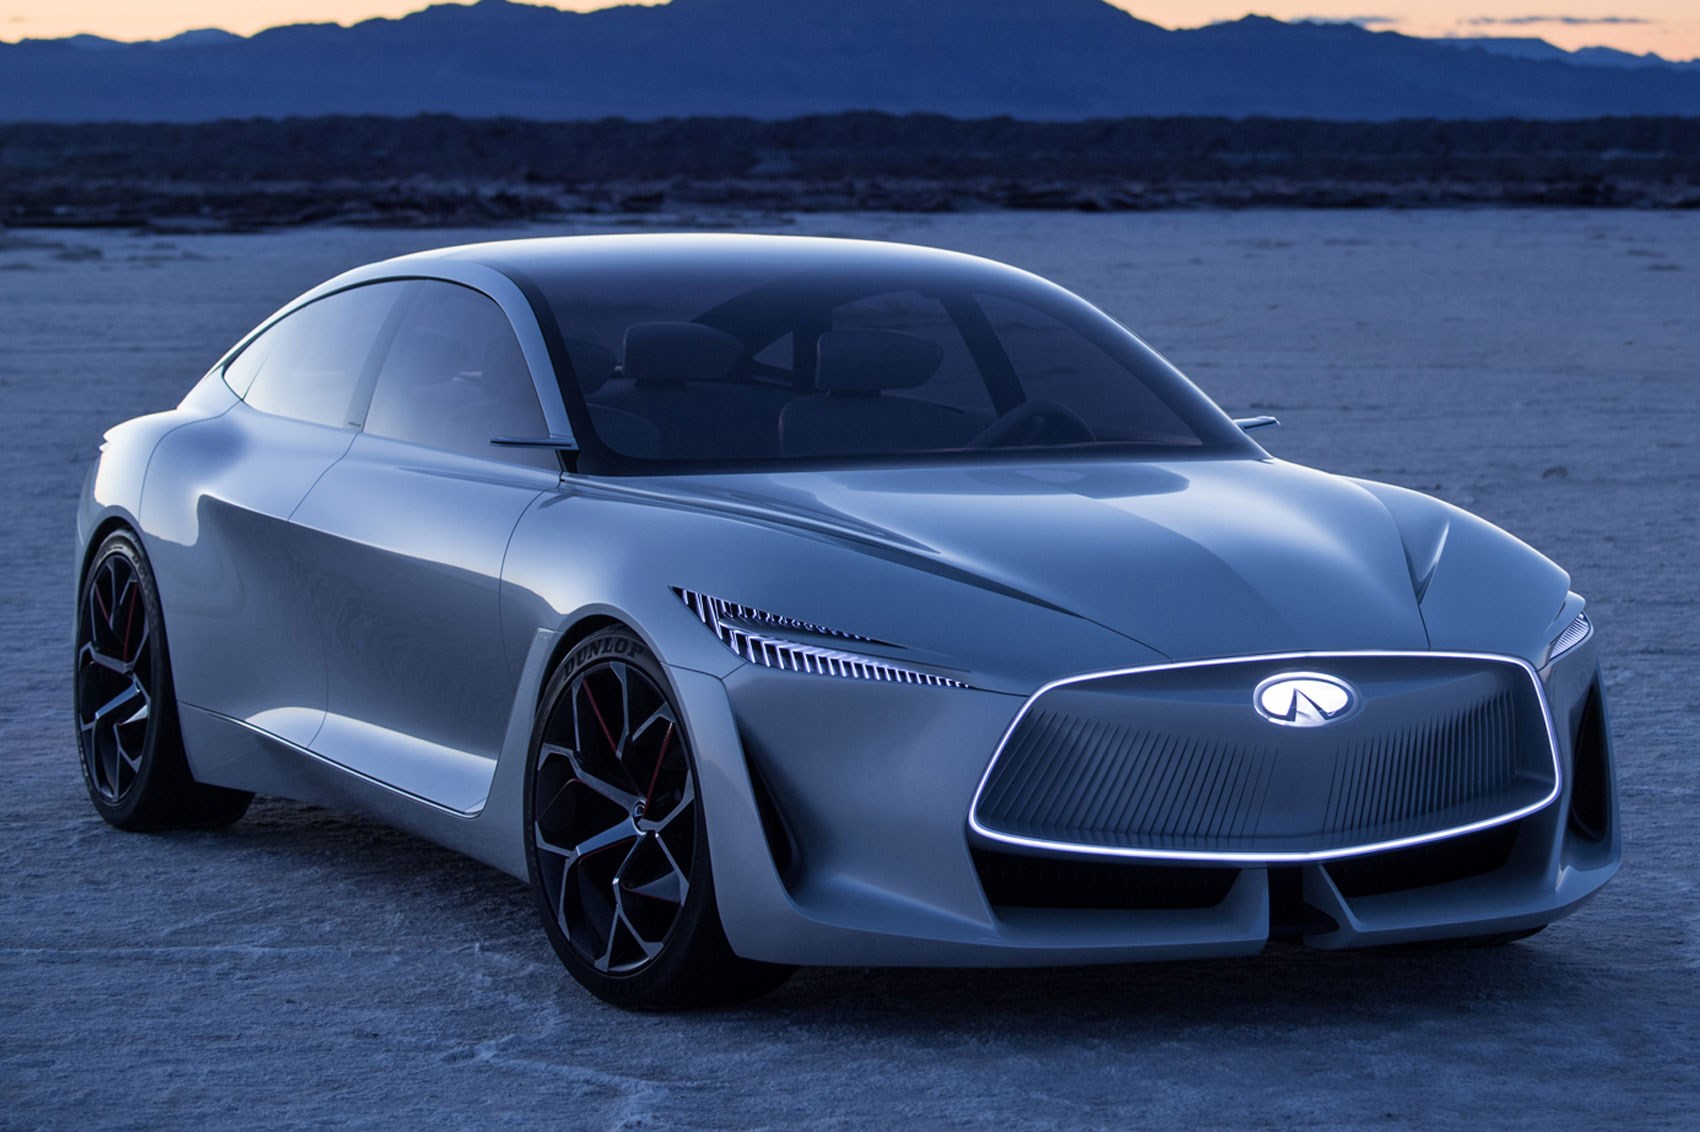 Infiniti Q Inspiration Concept is a zen wellbeing instructor on wheels